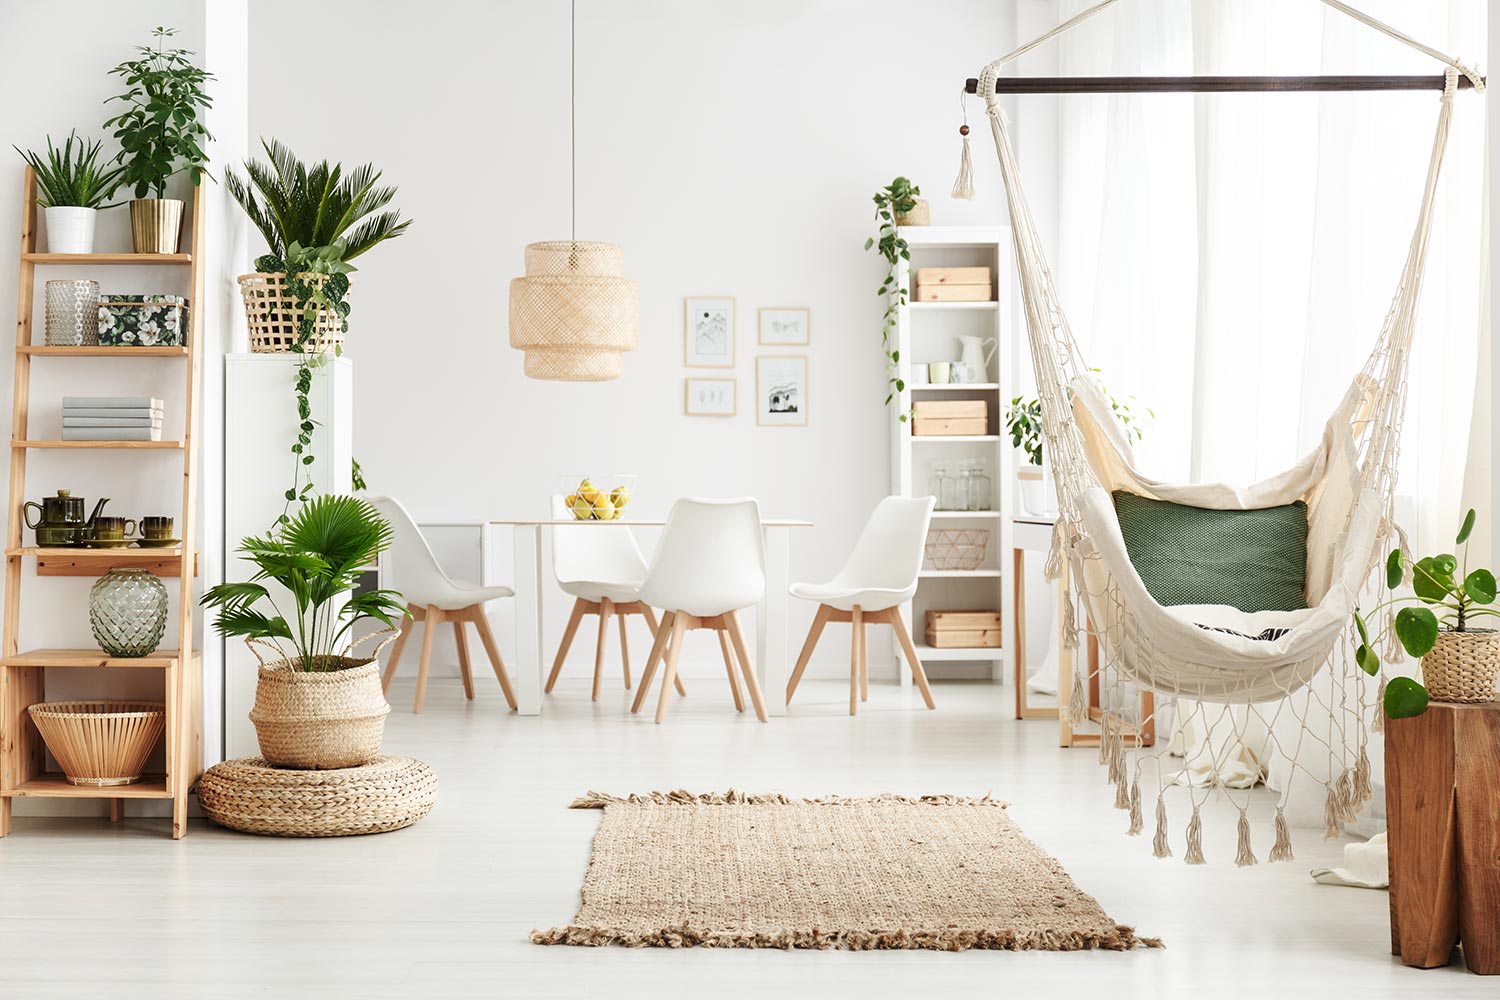 Brazilian chair hanging in white dining room